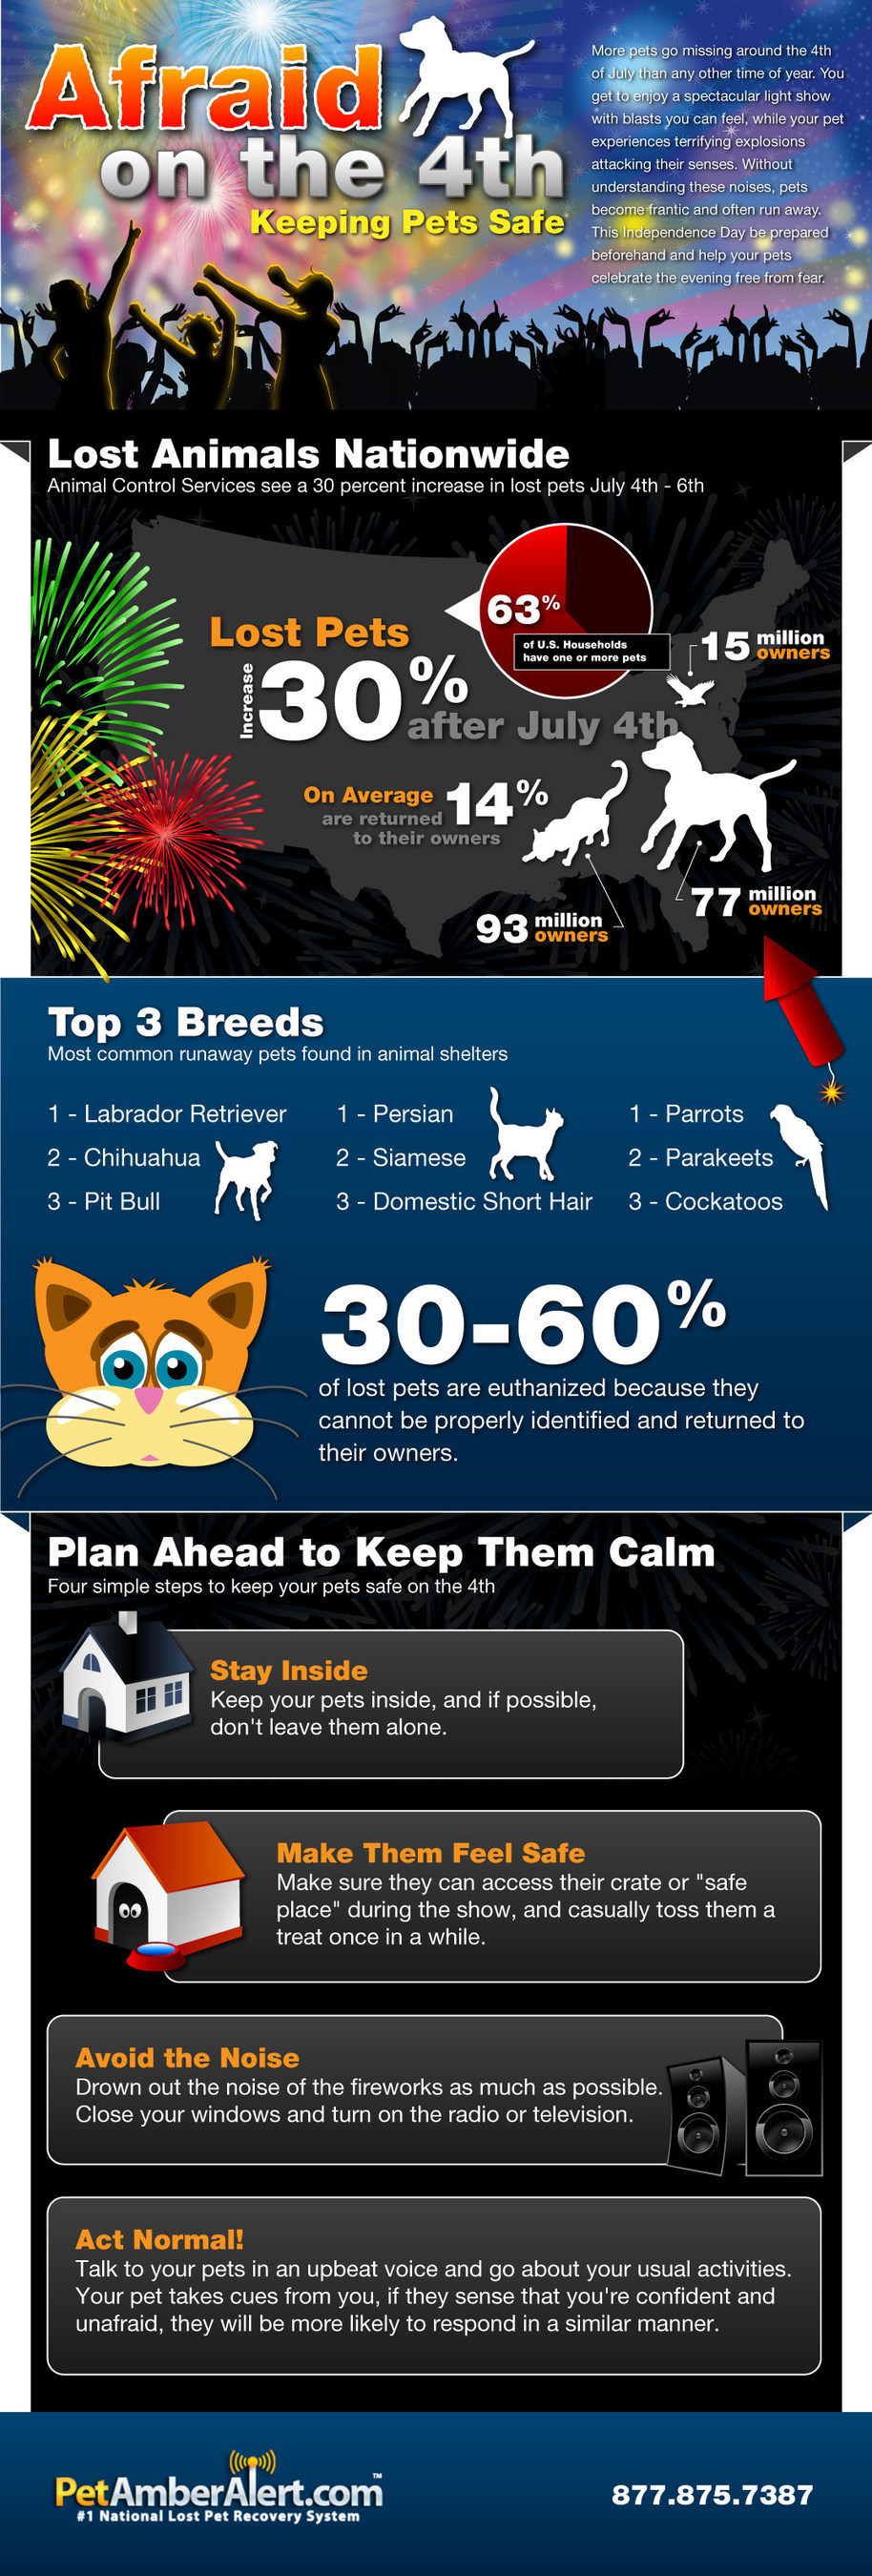 More Pets Lost on July 4th than any other time of the year